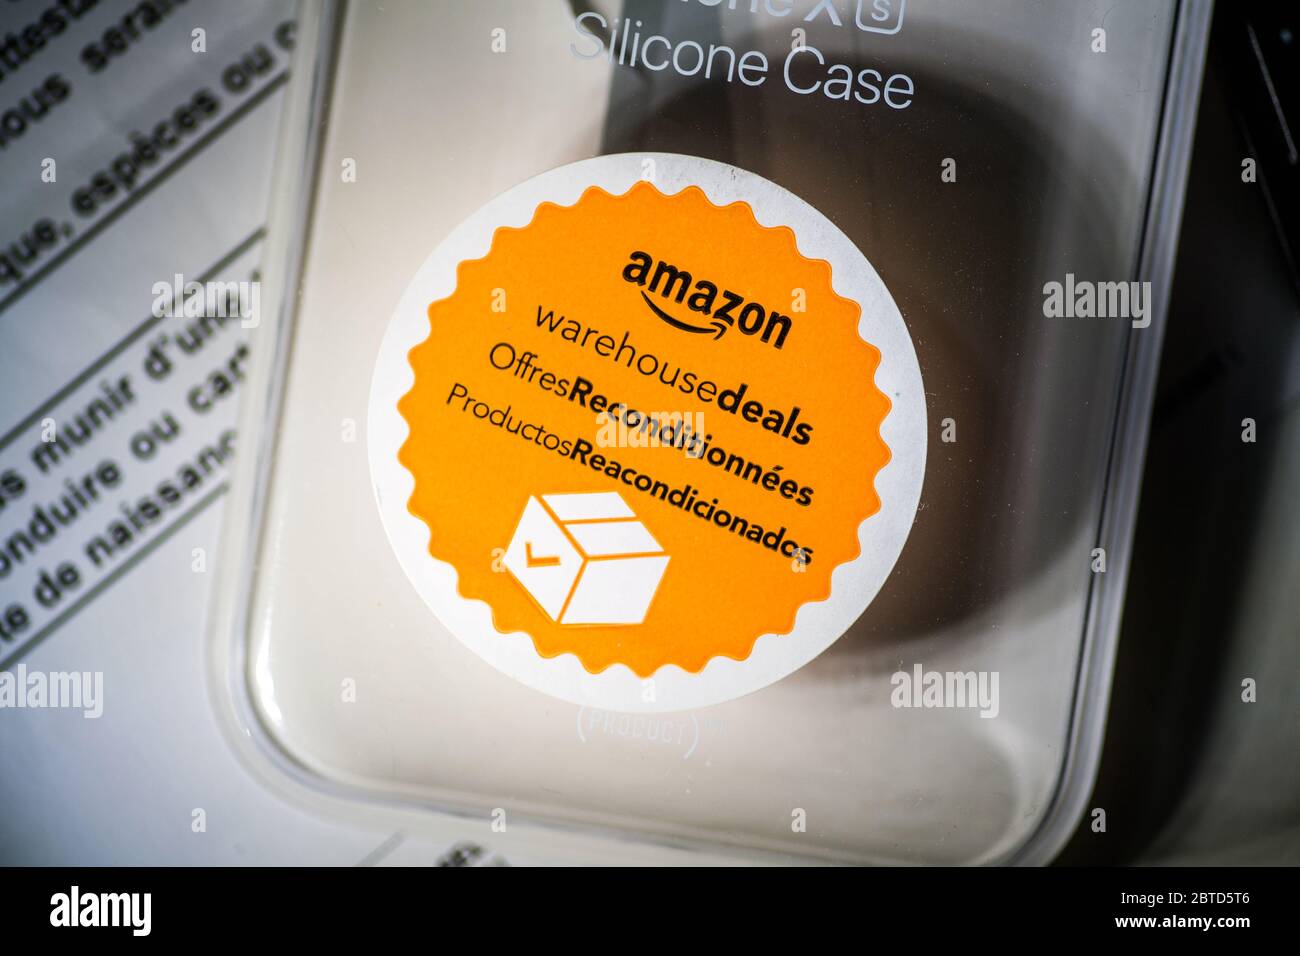 Paris, France - Nov 15, 2019: Amazon Warehouse Deals orange sticker on the package of used pre-owned Amazon Silicone Case Stock Photo